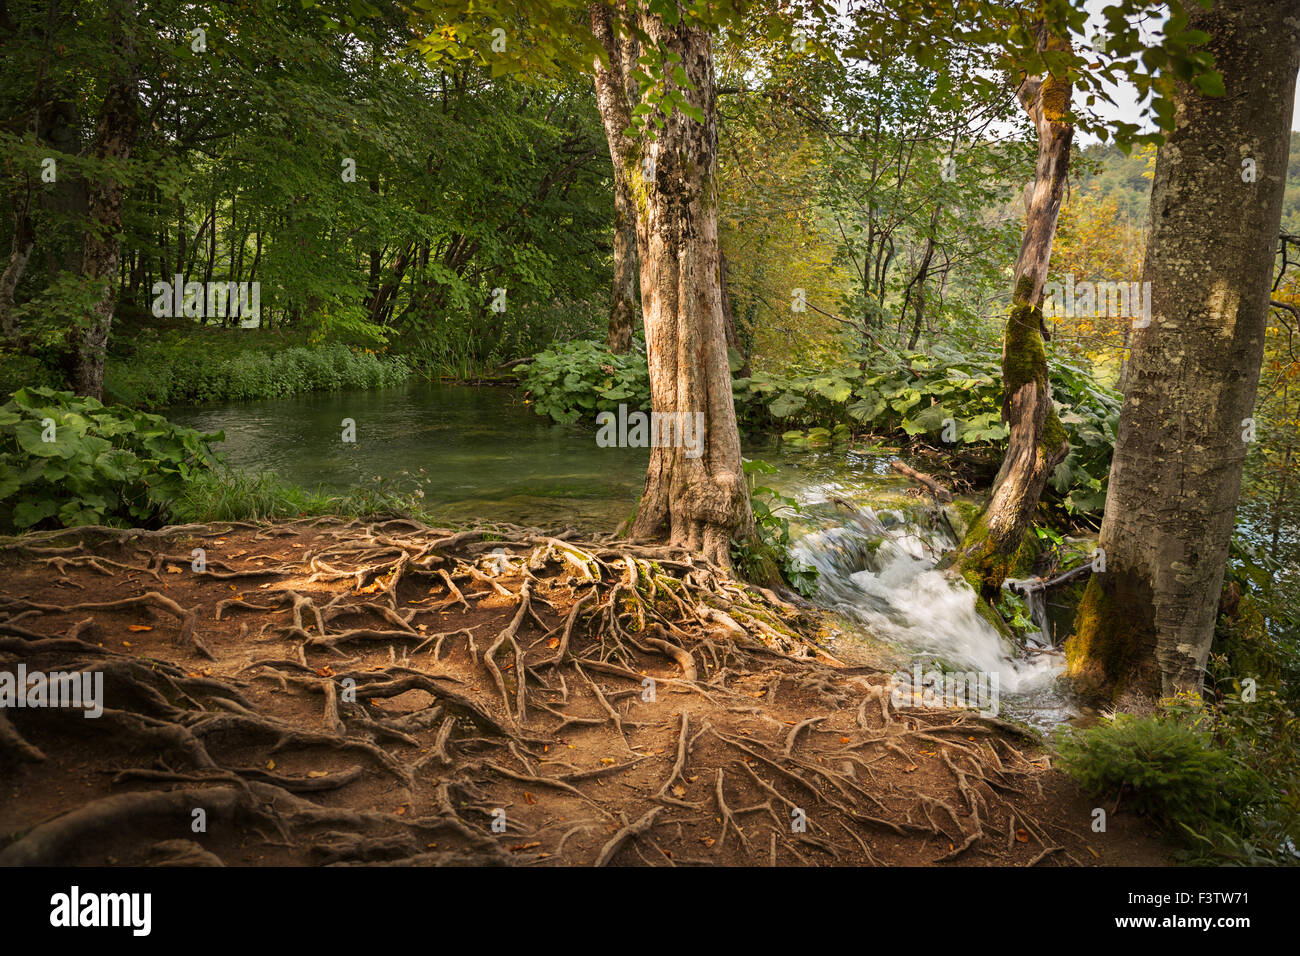 Forest in Plitvice Lakes National Park, Croatia Stock Photo